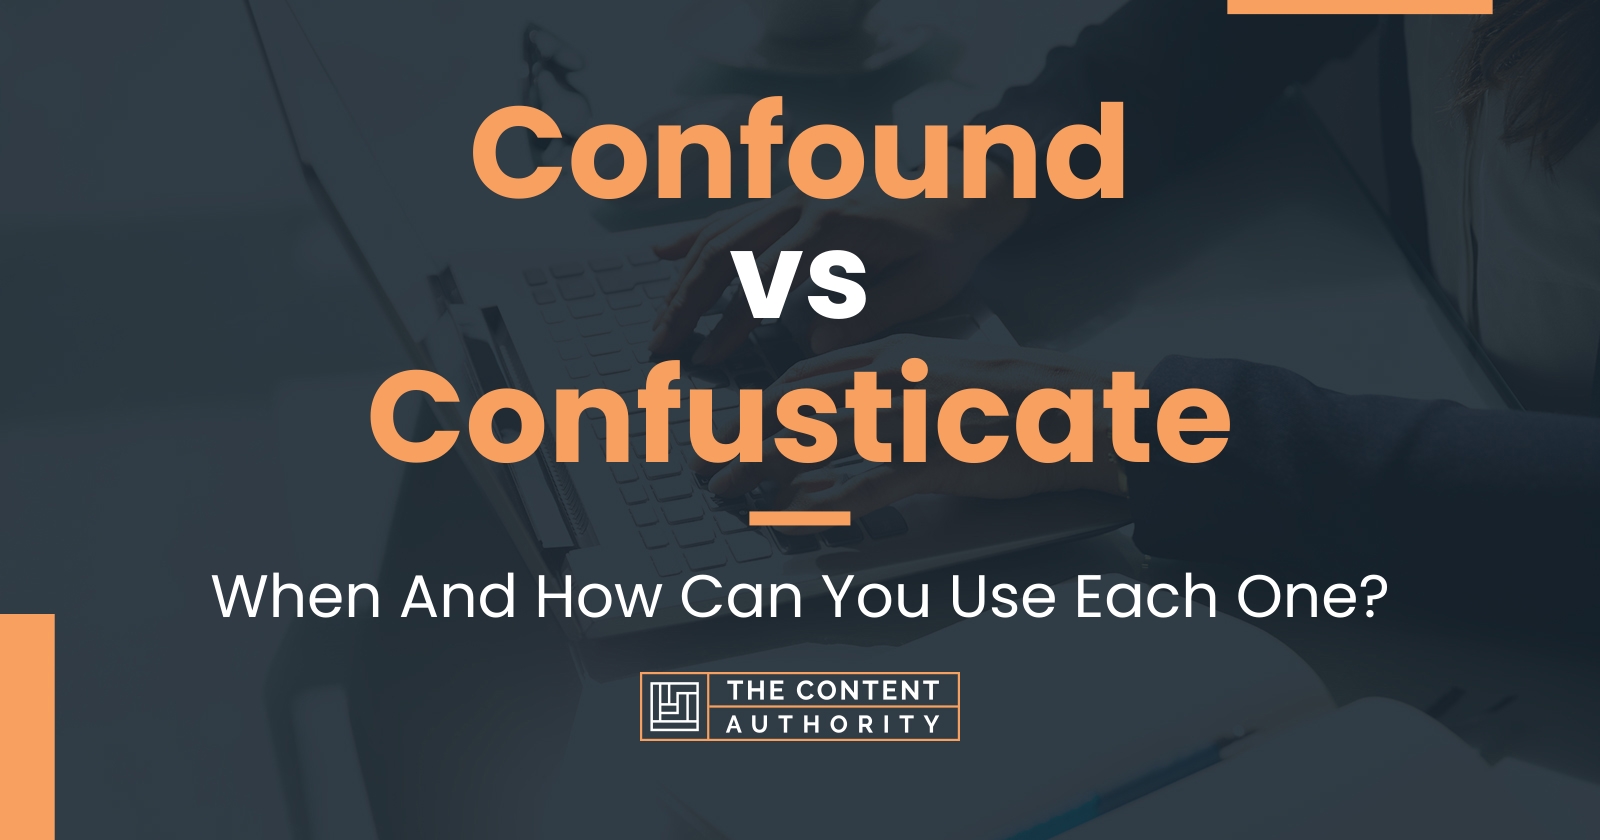 Confound vs Confusticate: When And How Can You Use Each One?